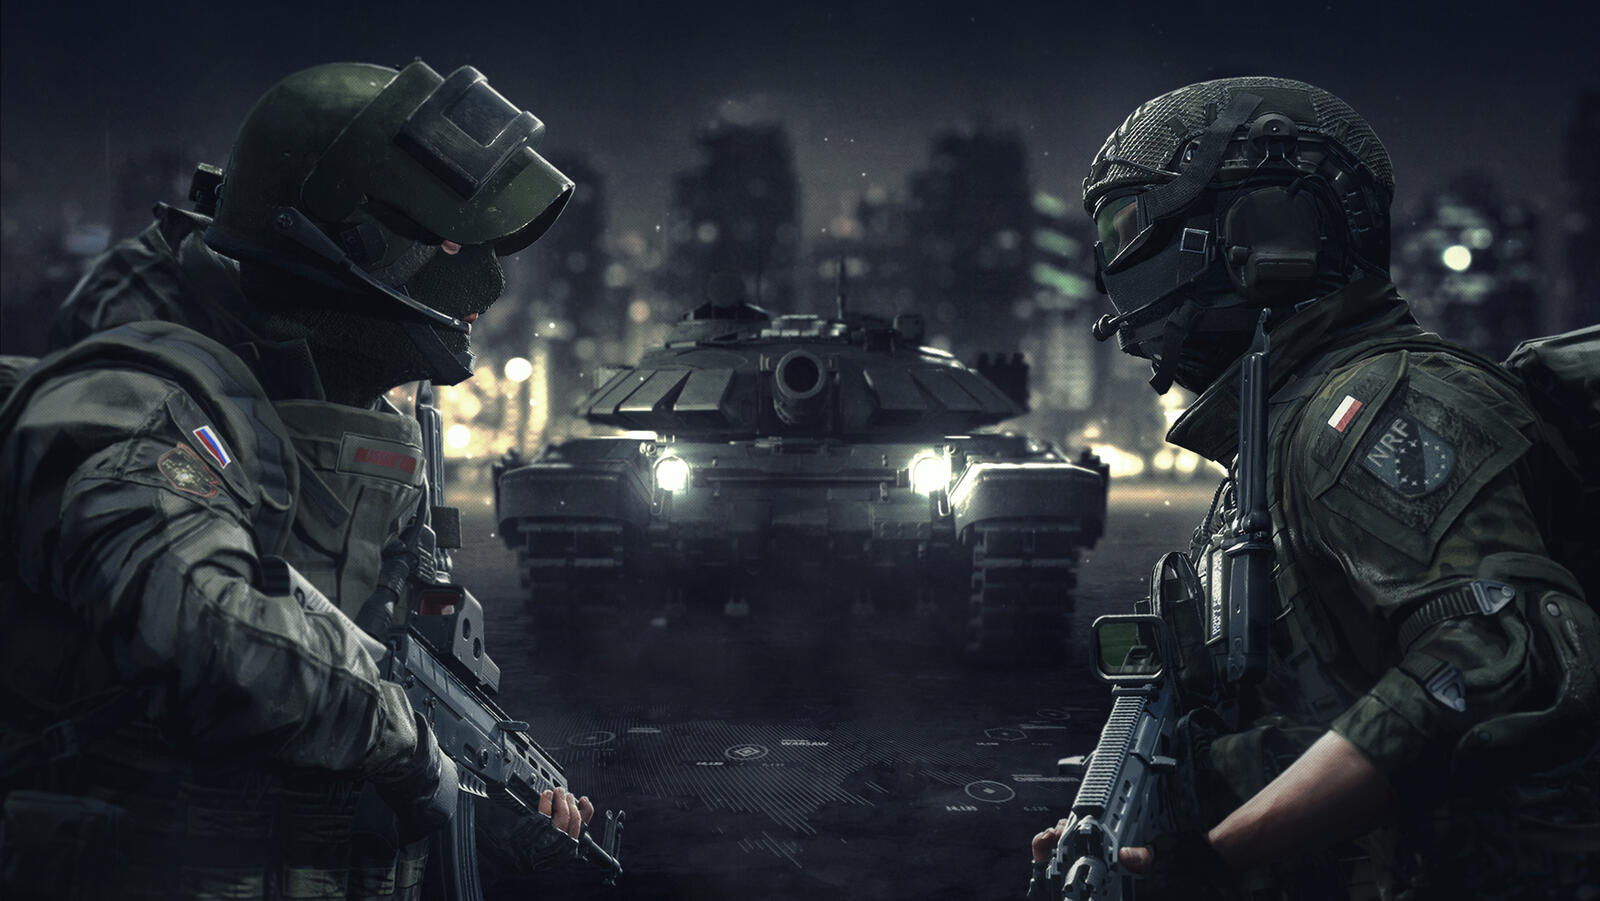 Wallpapers world war 3 the 2018 Games soldiers on the desktop